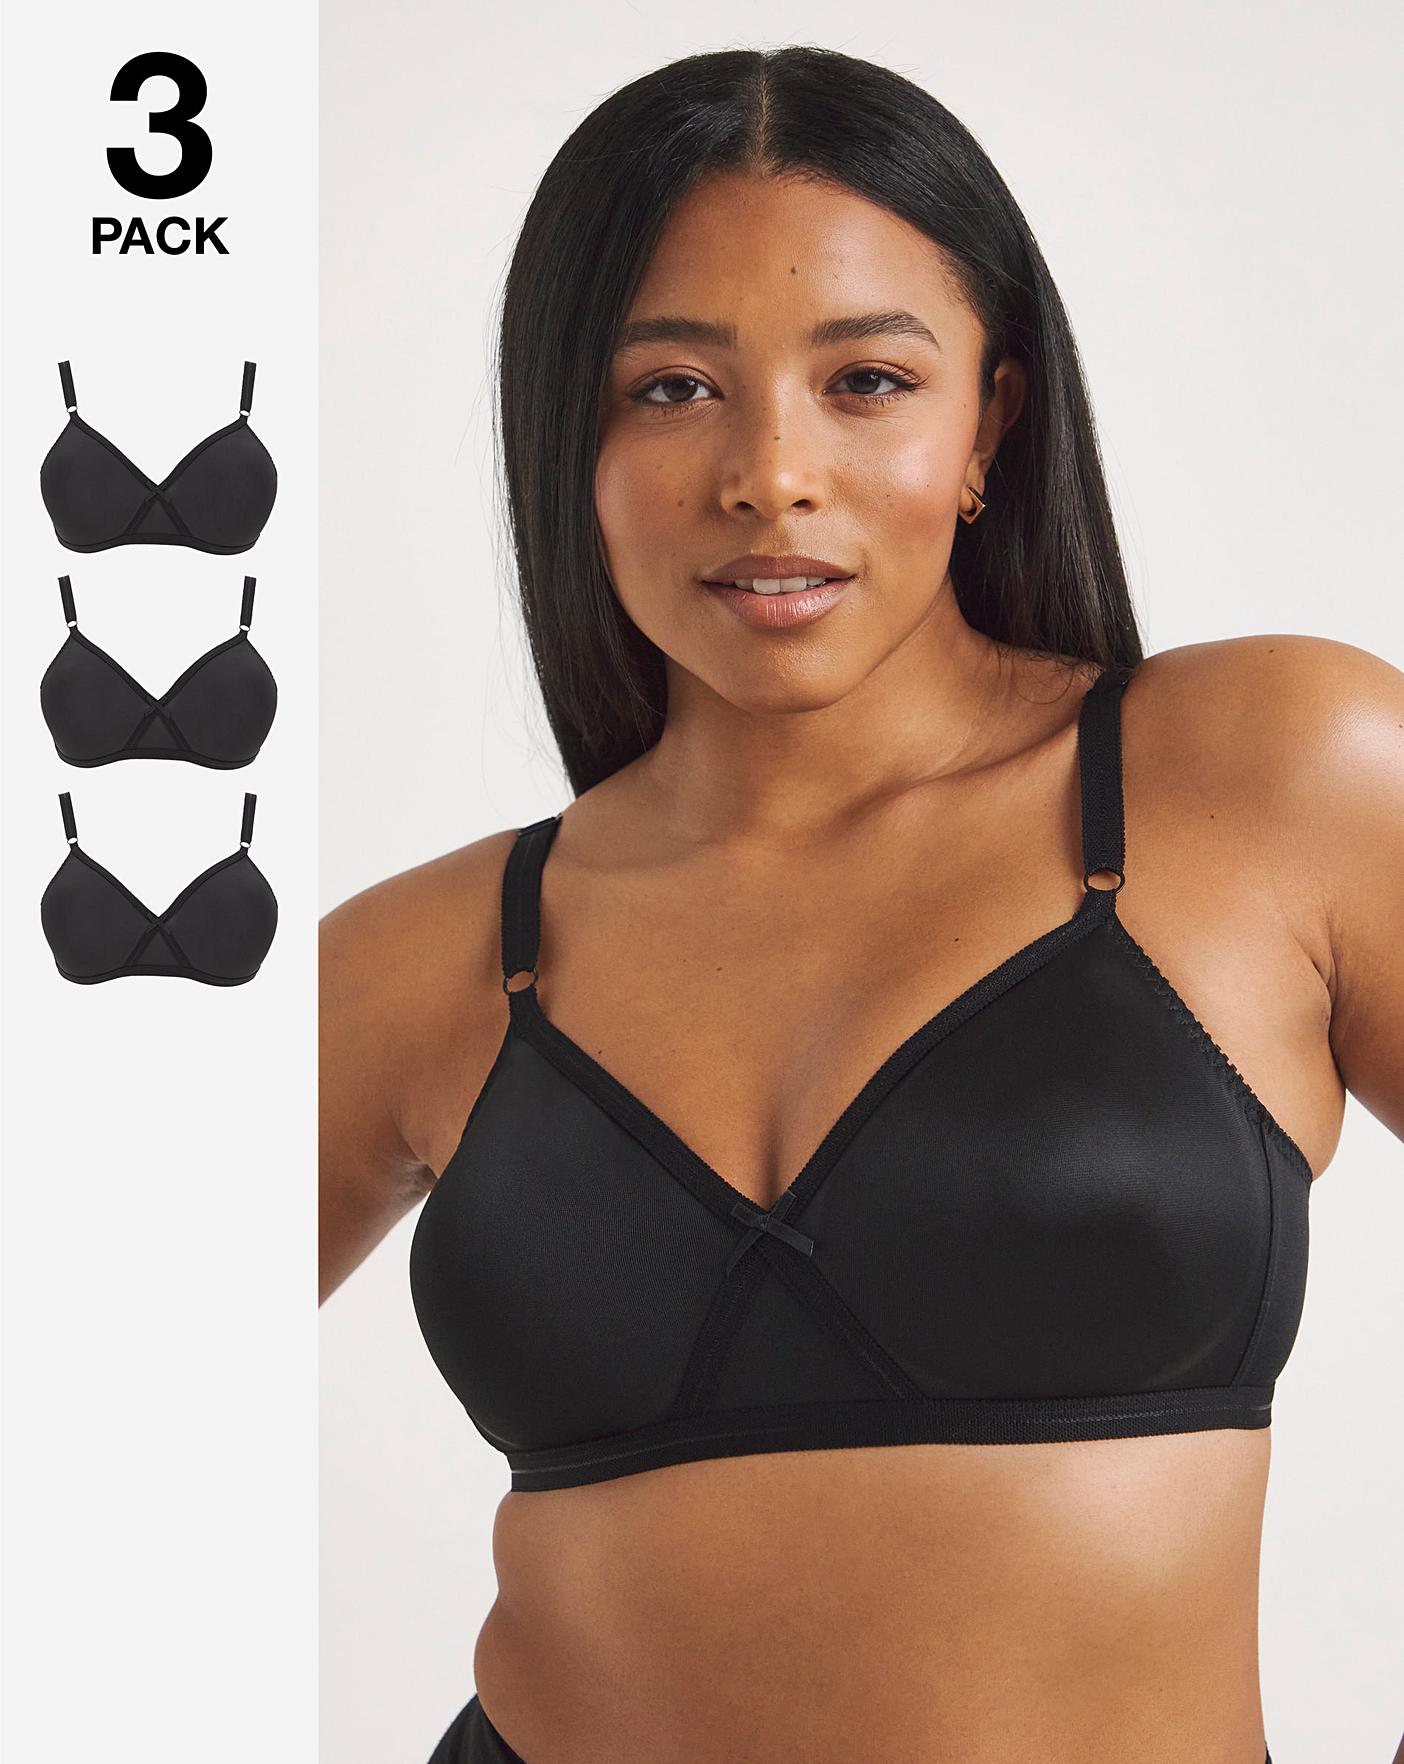 Everyday Bras: Bras for Daily Wear at Best Price